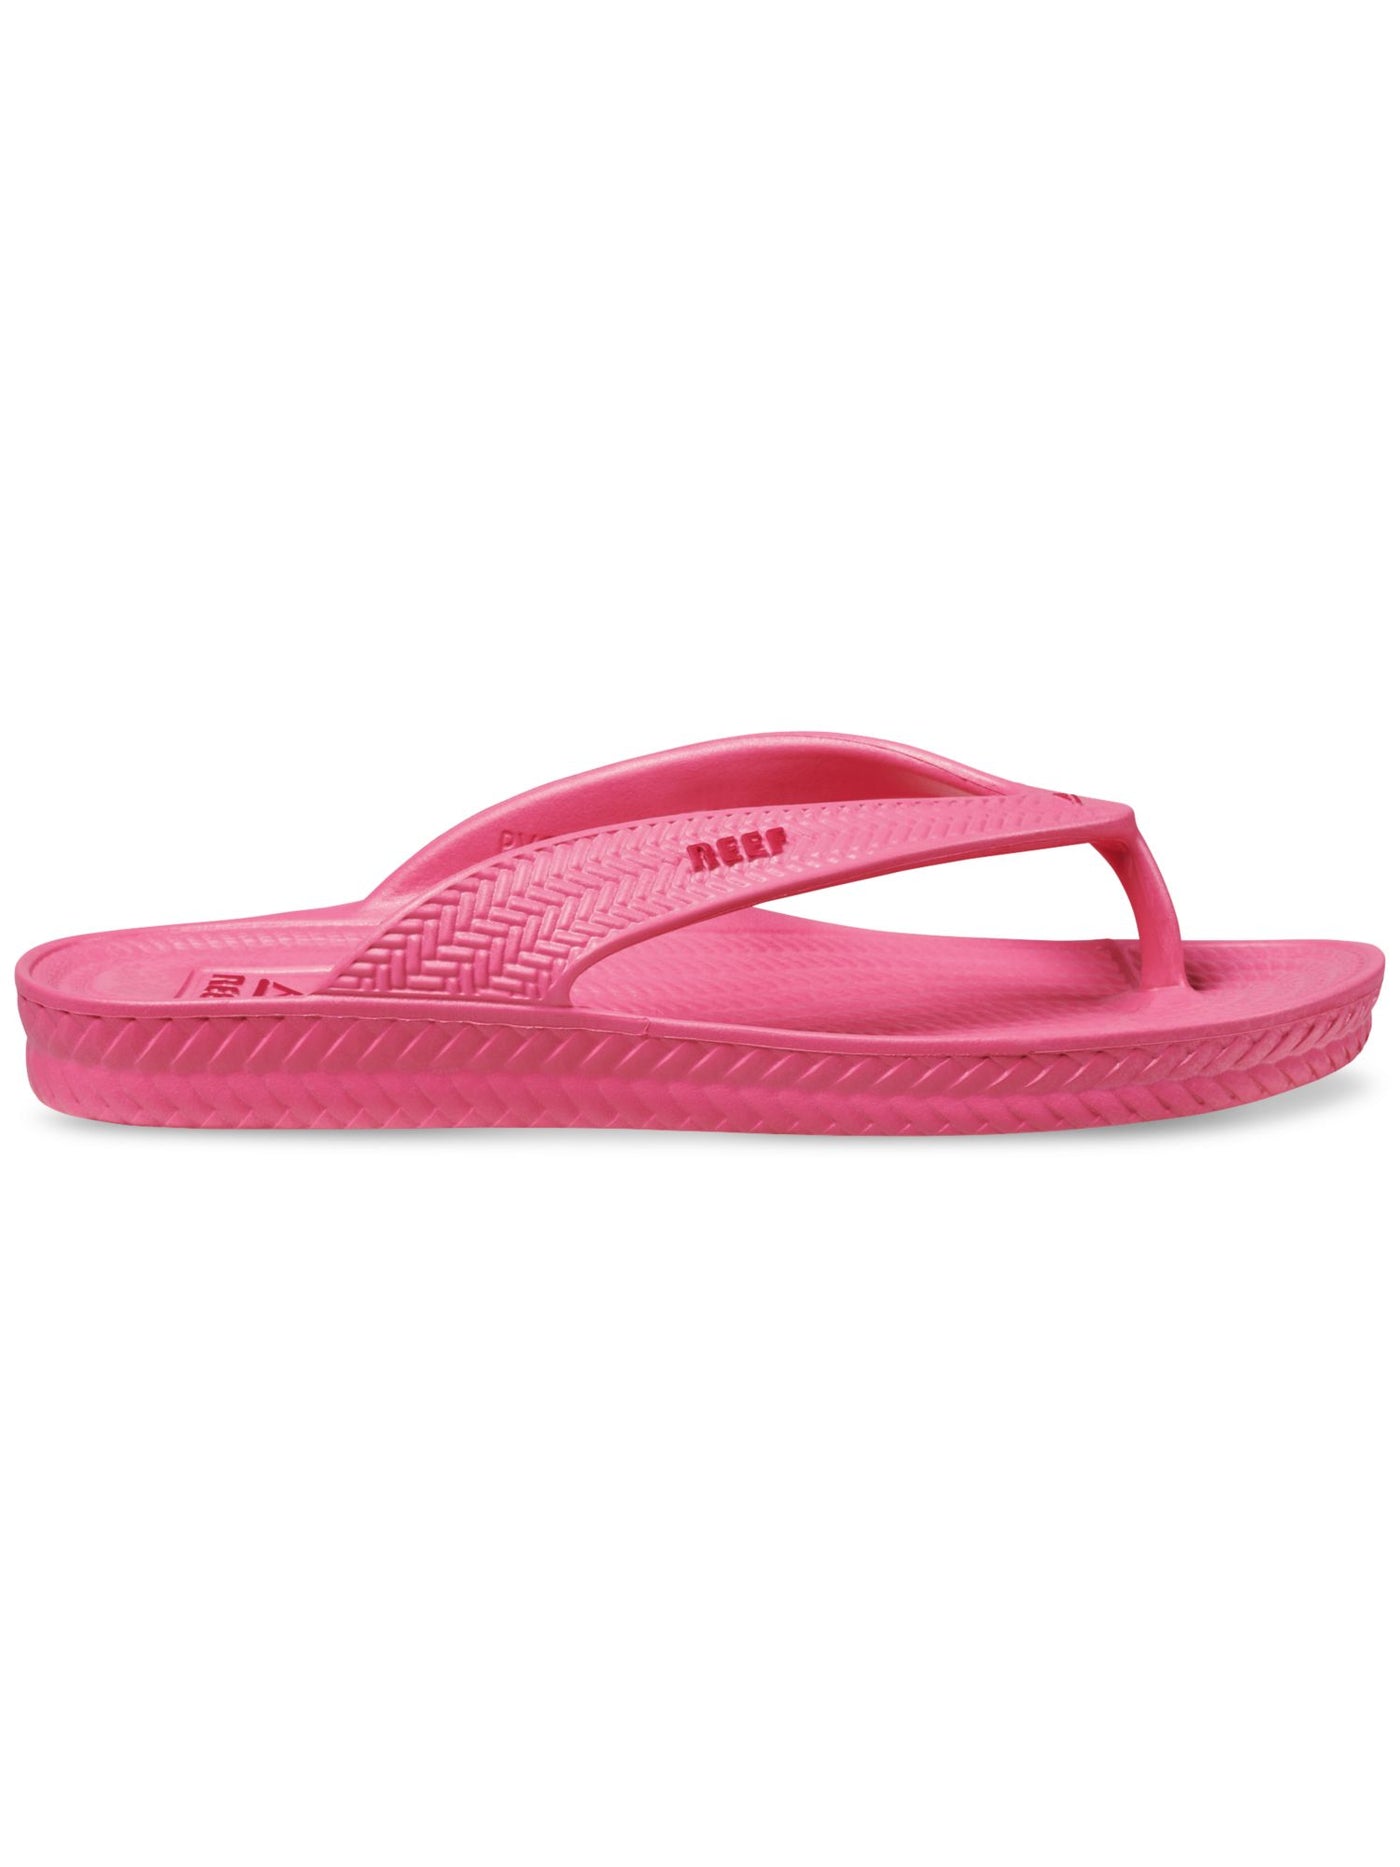 REEF Womens Pink Arch Support Water Court Round Toe Slip On Thong Sandals Shoes 6